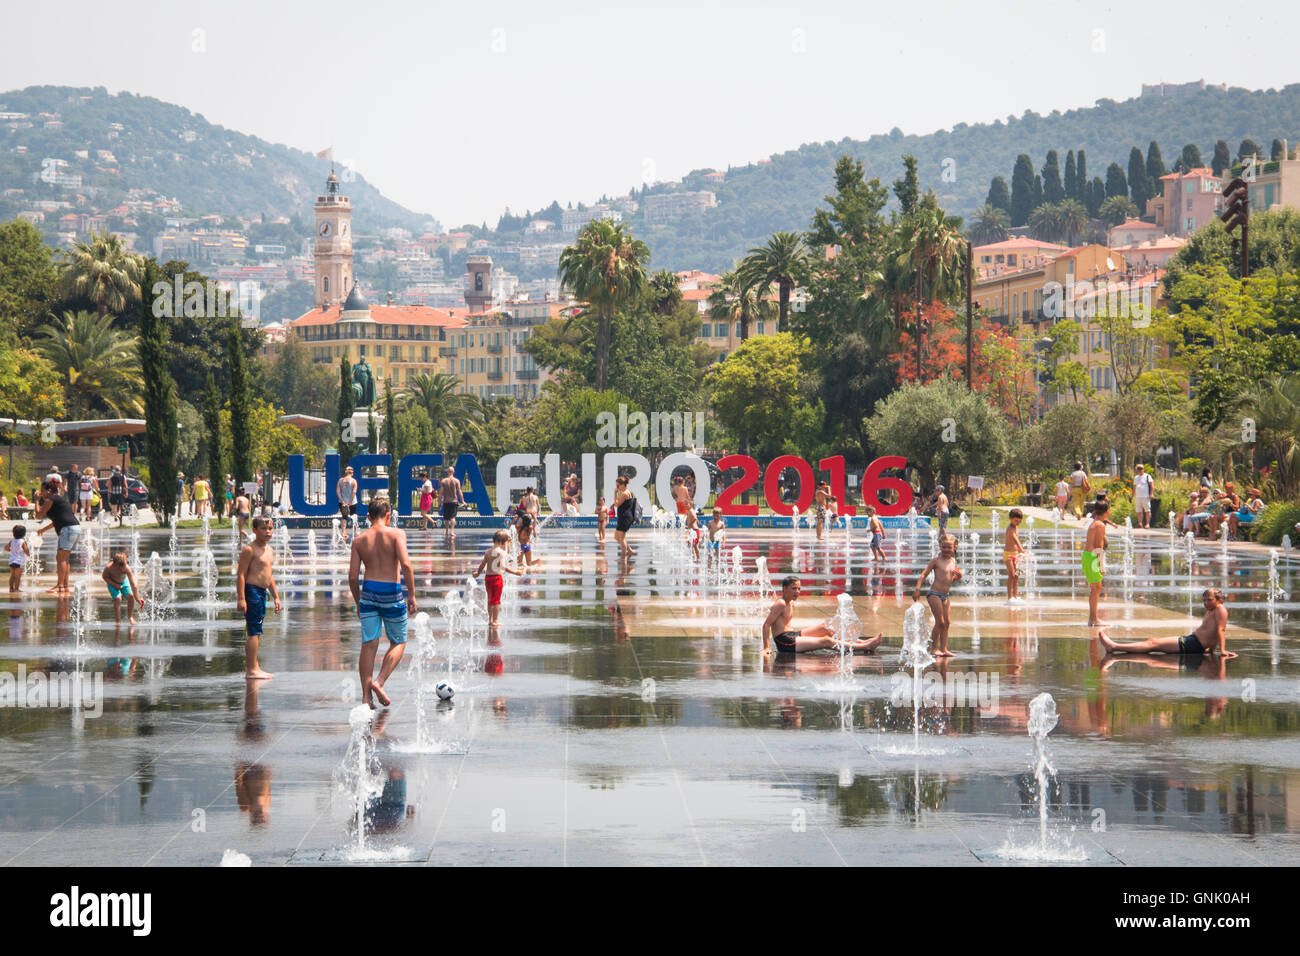 NICE, FRANCE - JULY 2016: People playing in the fountains on the main square of Nice in France Stock Photo